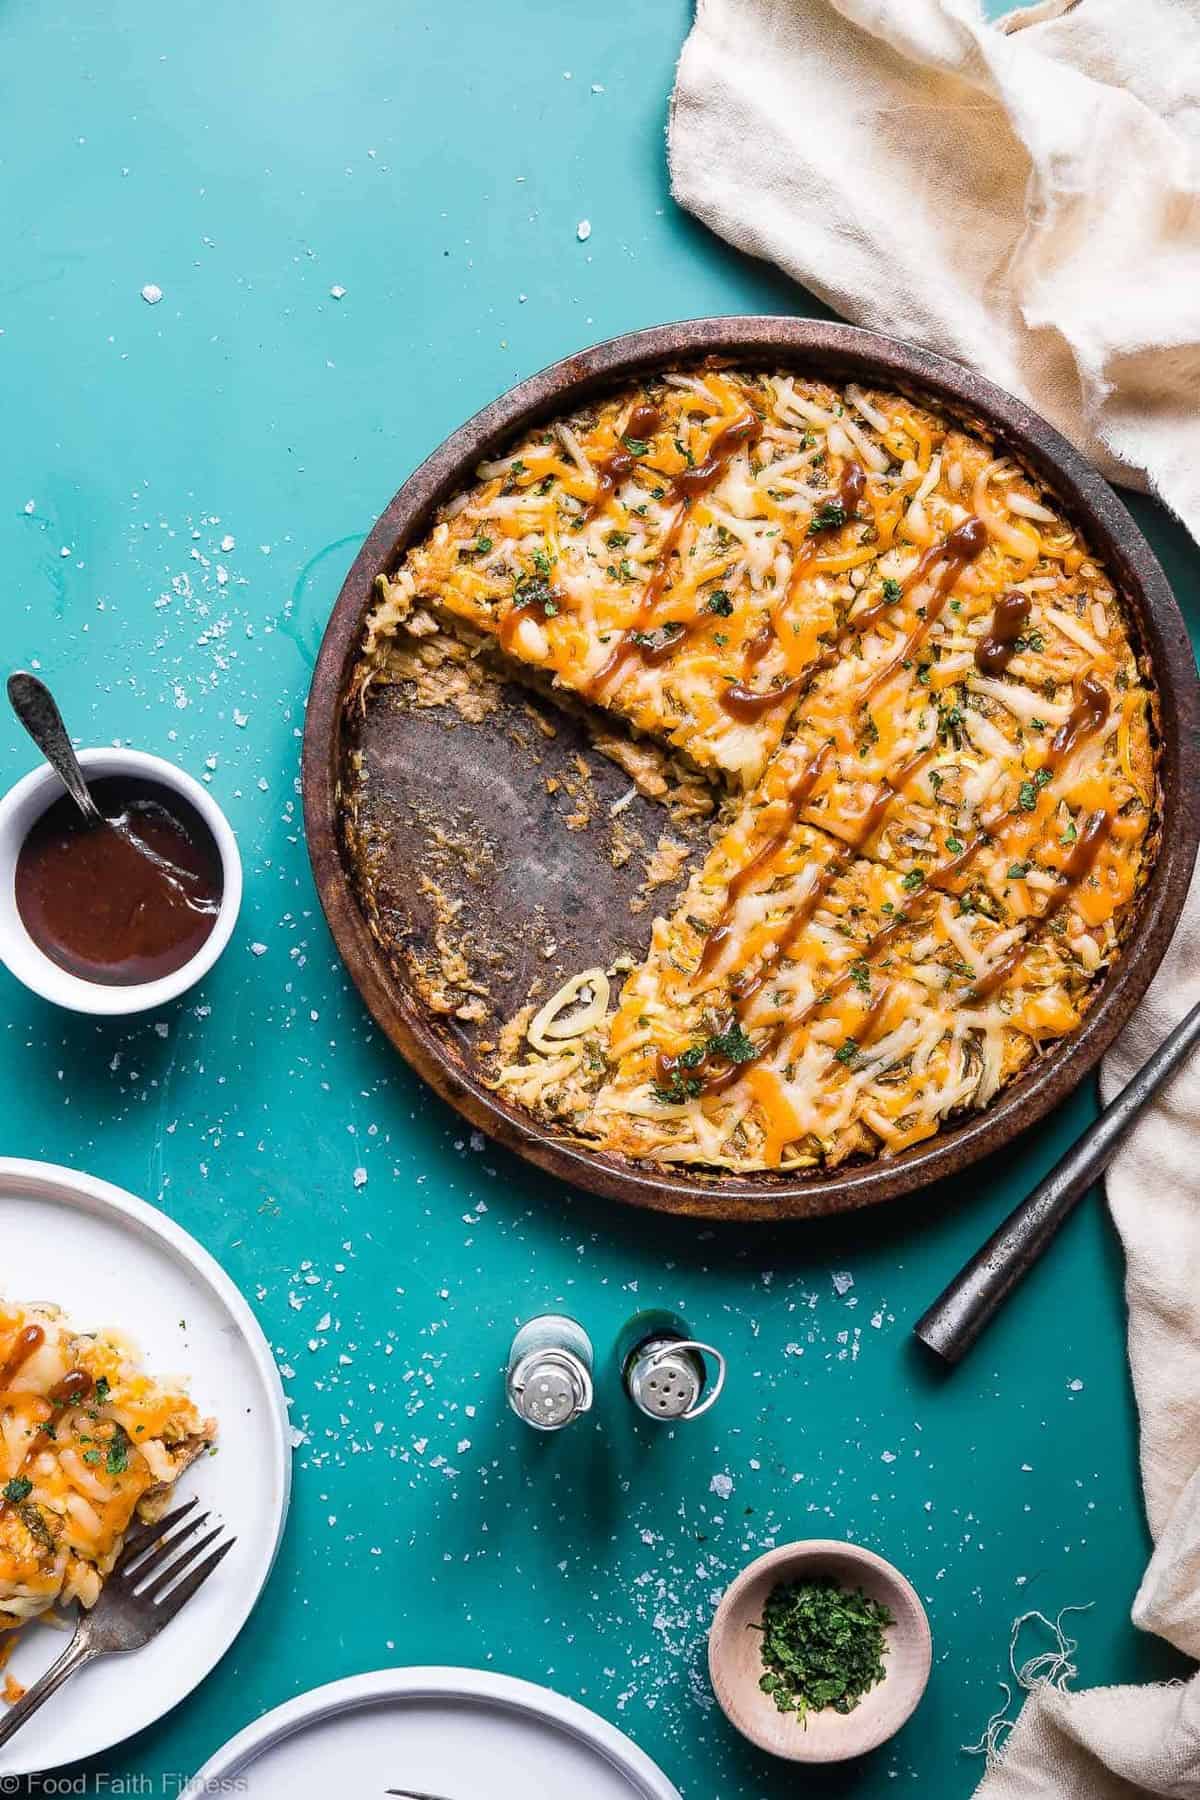 Keto BBQ Chicken Zoodle Casserole - This 6 ingredient casserole is an ULTRA delicious weeknight dinner that is under 300 calories, protein packed and will please even picky eaters! Gluten free & low carb too! | #Foodfaithfitness | #Keto #Lowcarb #Glutenfree #Sugarfree #Healthy